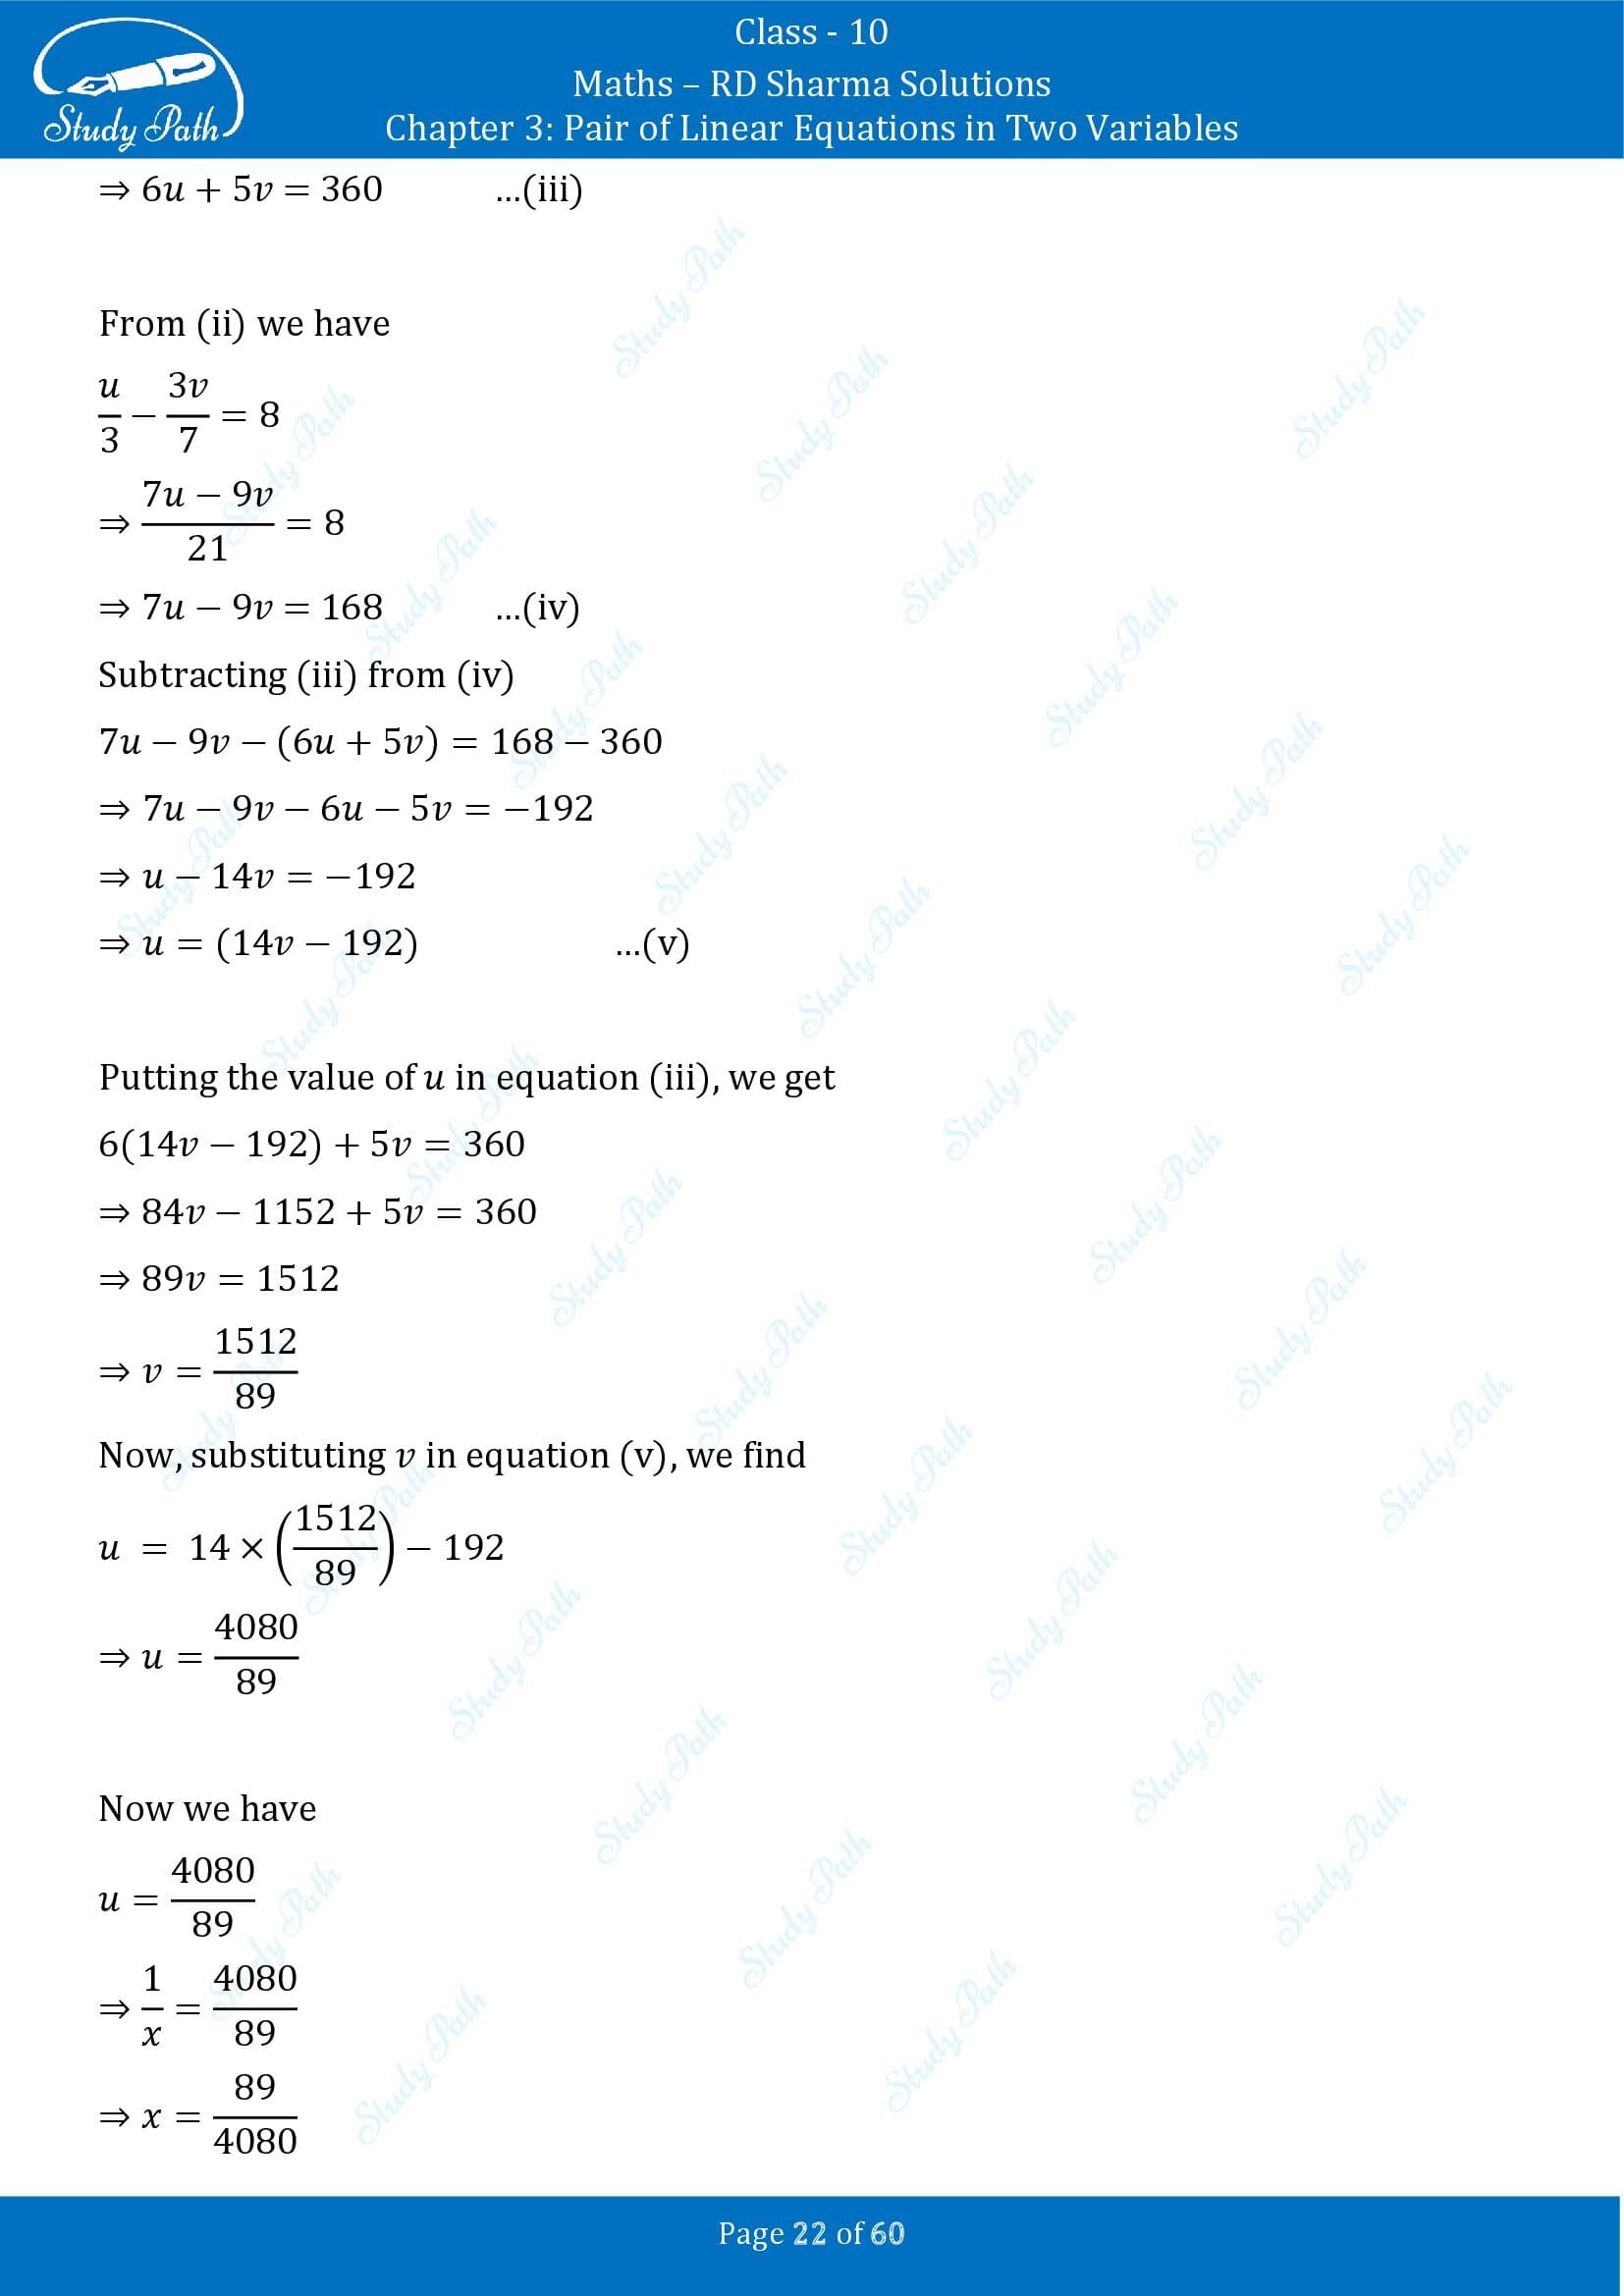 RD Sharma Solutions Class 10 Chapter 3 Pair of Linear Equations in Two Variables Exercise 3.3 00022